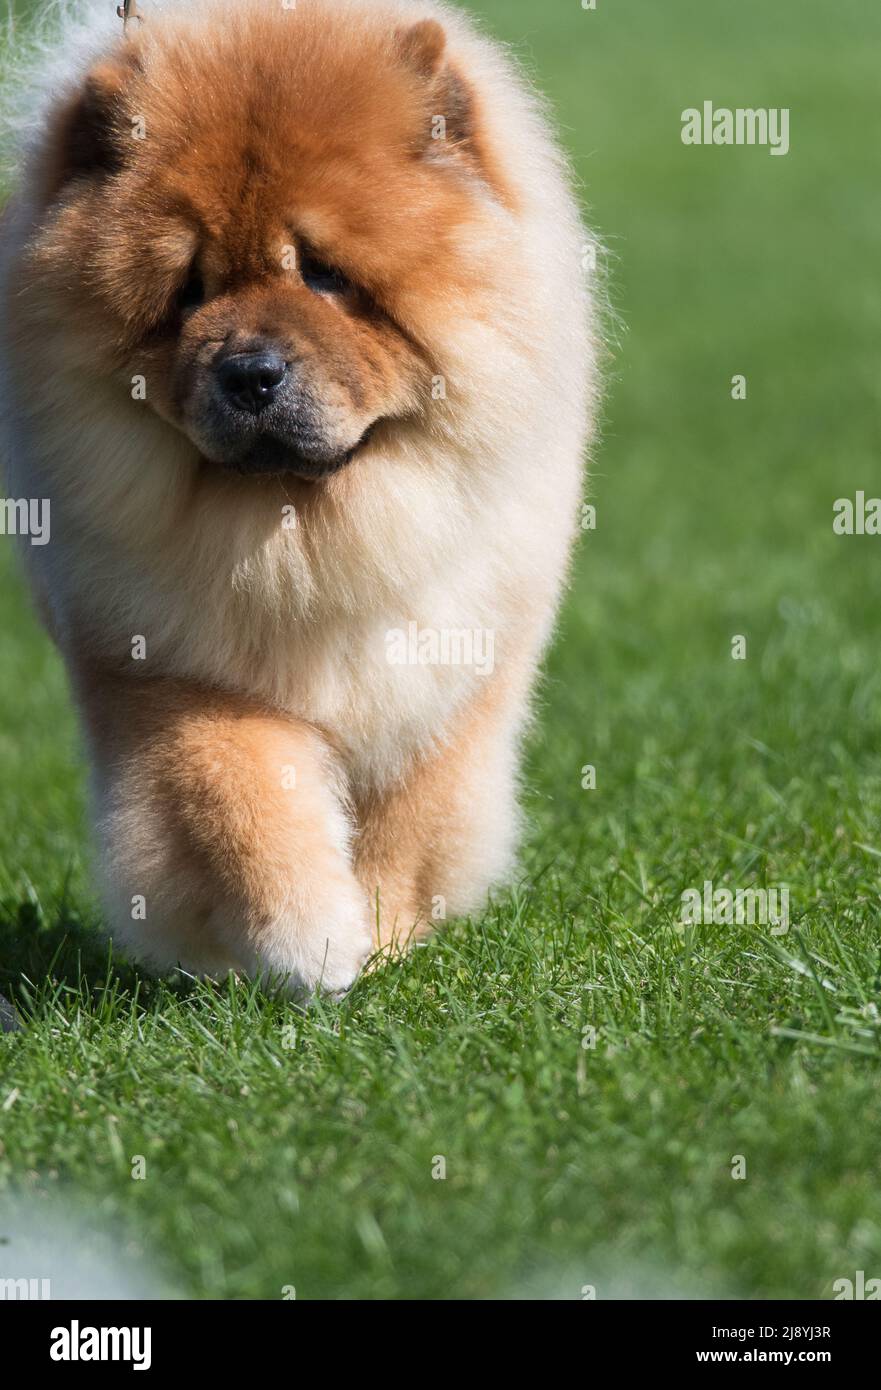 Chow Chow close up with green grass background Stock Photo